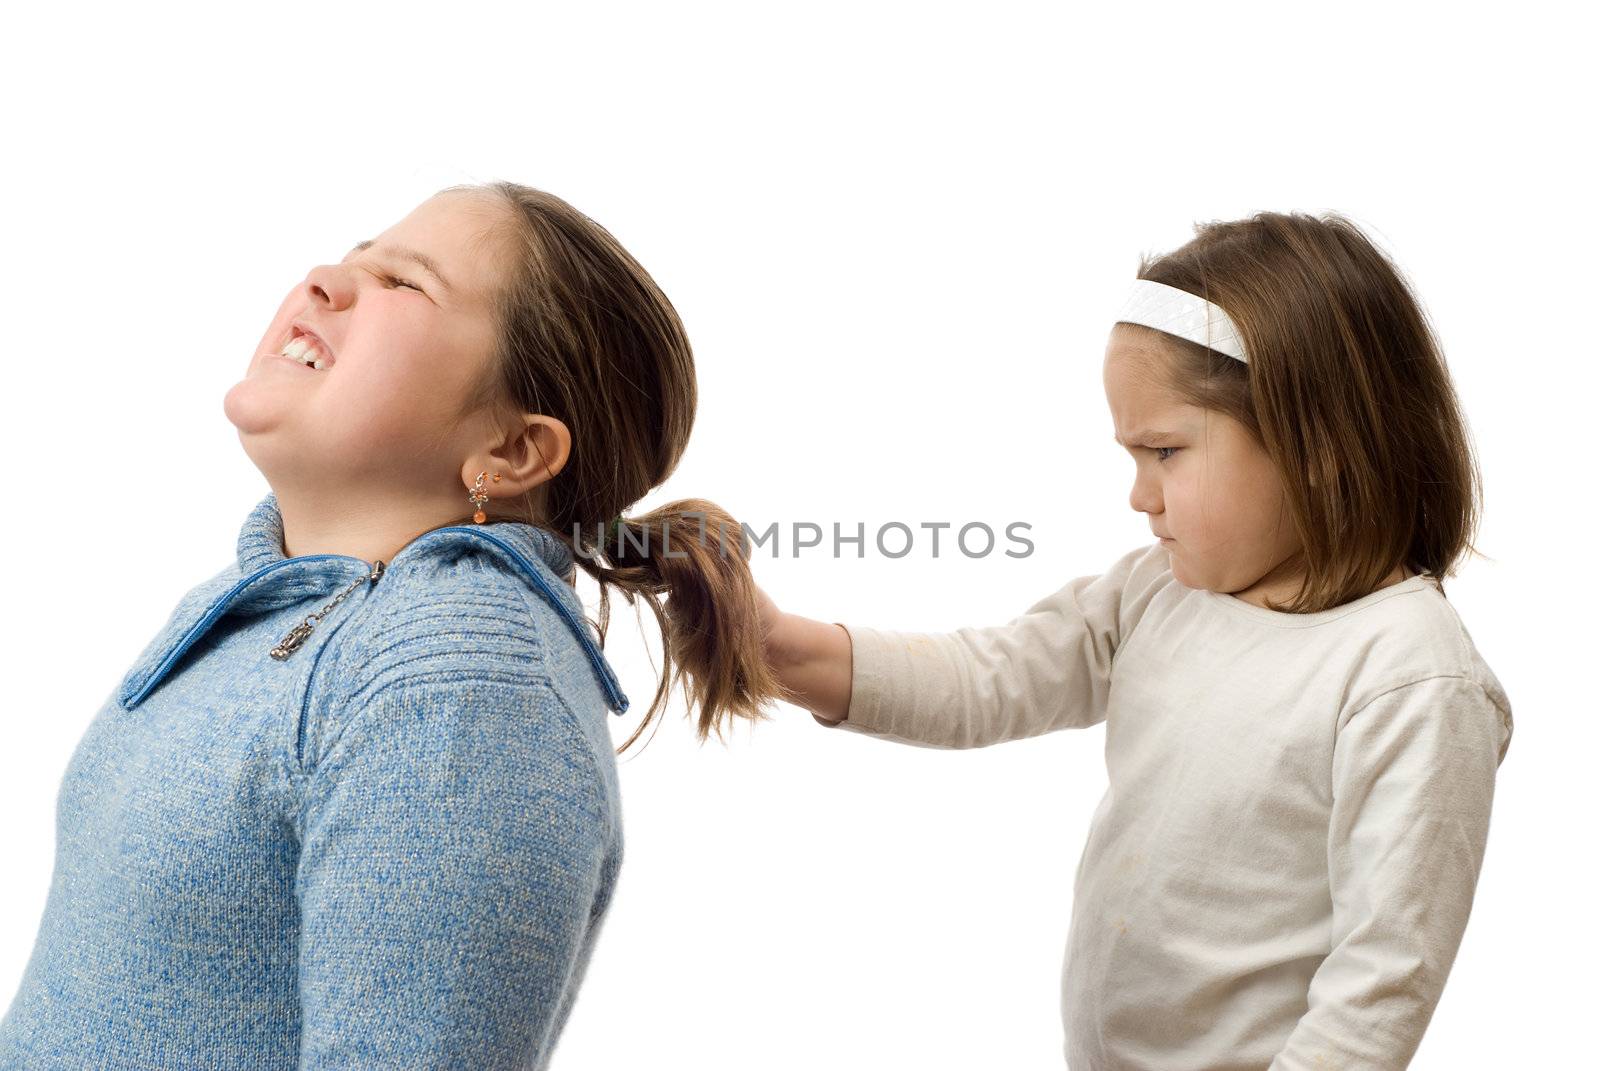 A mean little girl pulling on her older sister's hair, isolated against a white background